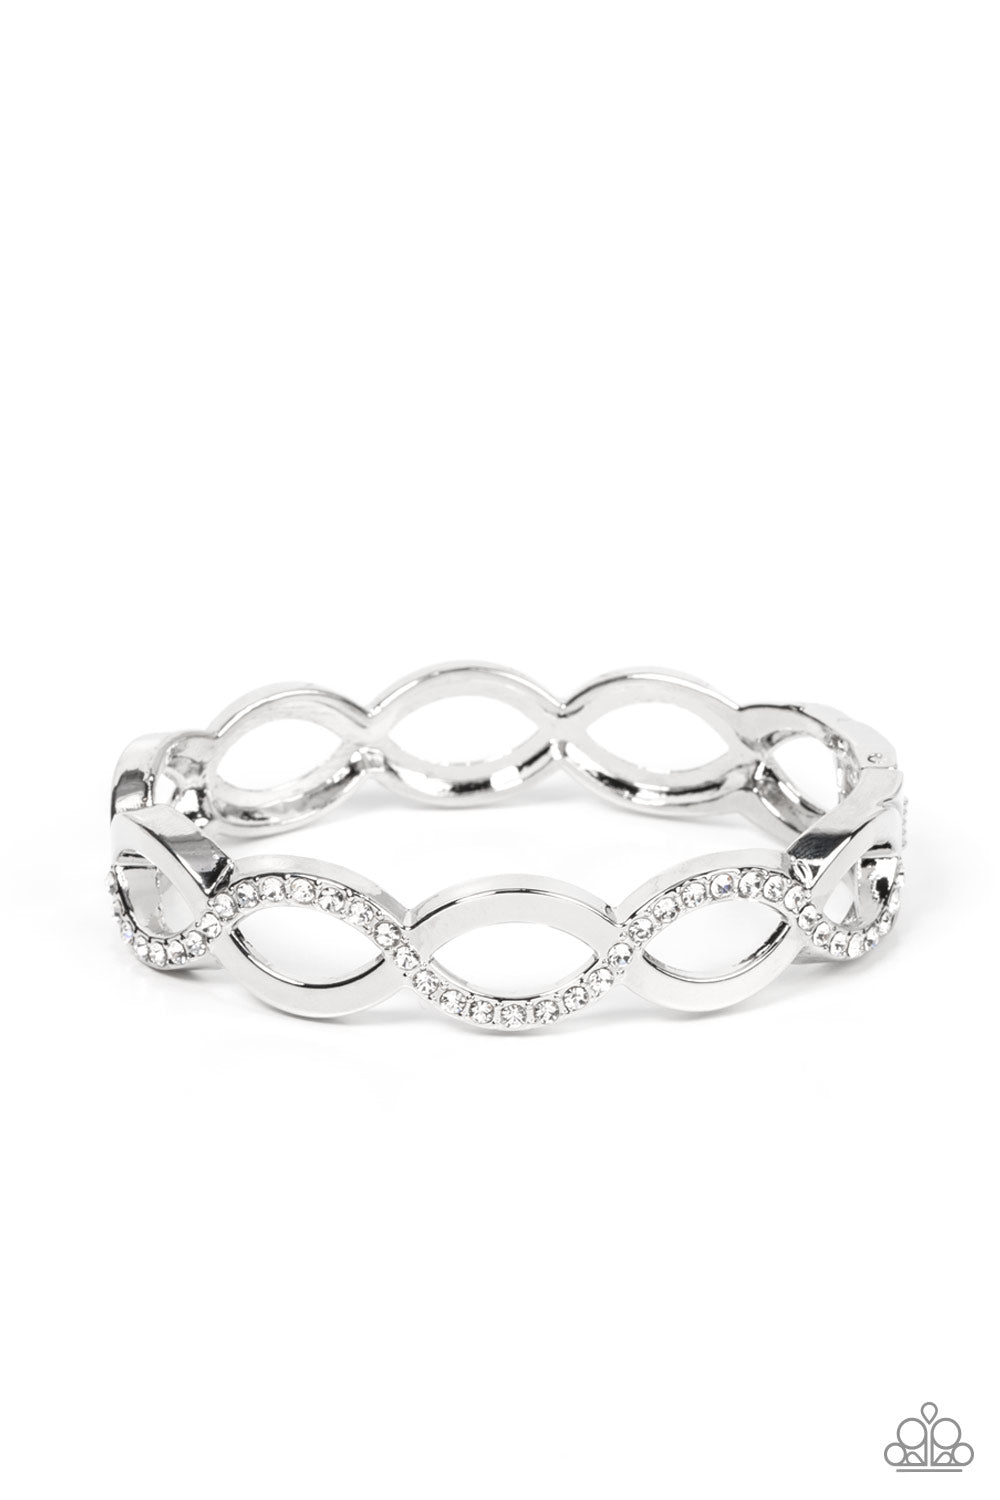 Tailored Twinkle - White and Silver Hinged Closure Bracelet - Paparazzi Accessories - Silver bars intertwine into infinity frames that delicately hinge around the wrist. The front of the flawless centerpiece is dusted in a wavy row of white rhinestones, adding a timeless twinkle to the versatile design. Features a hinged closure.